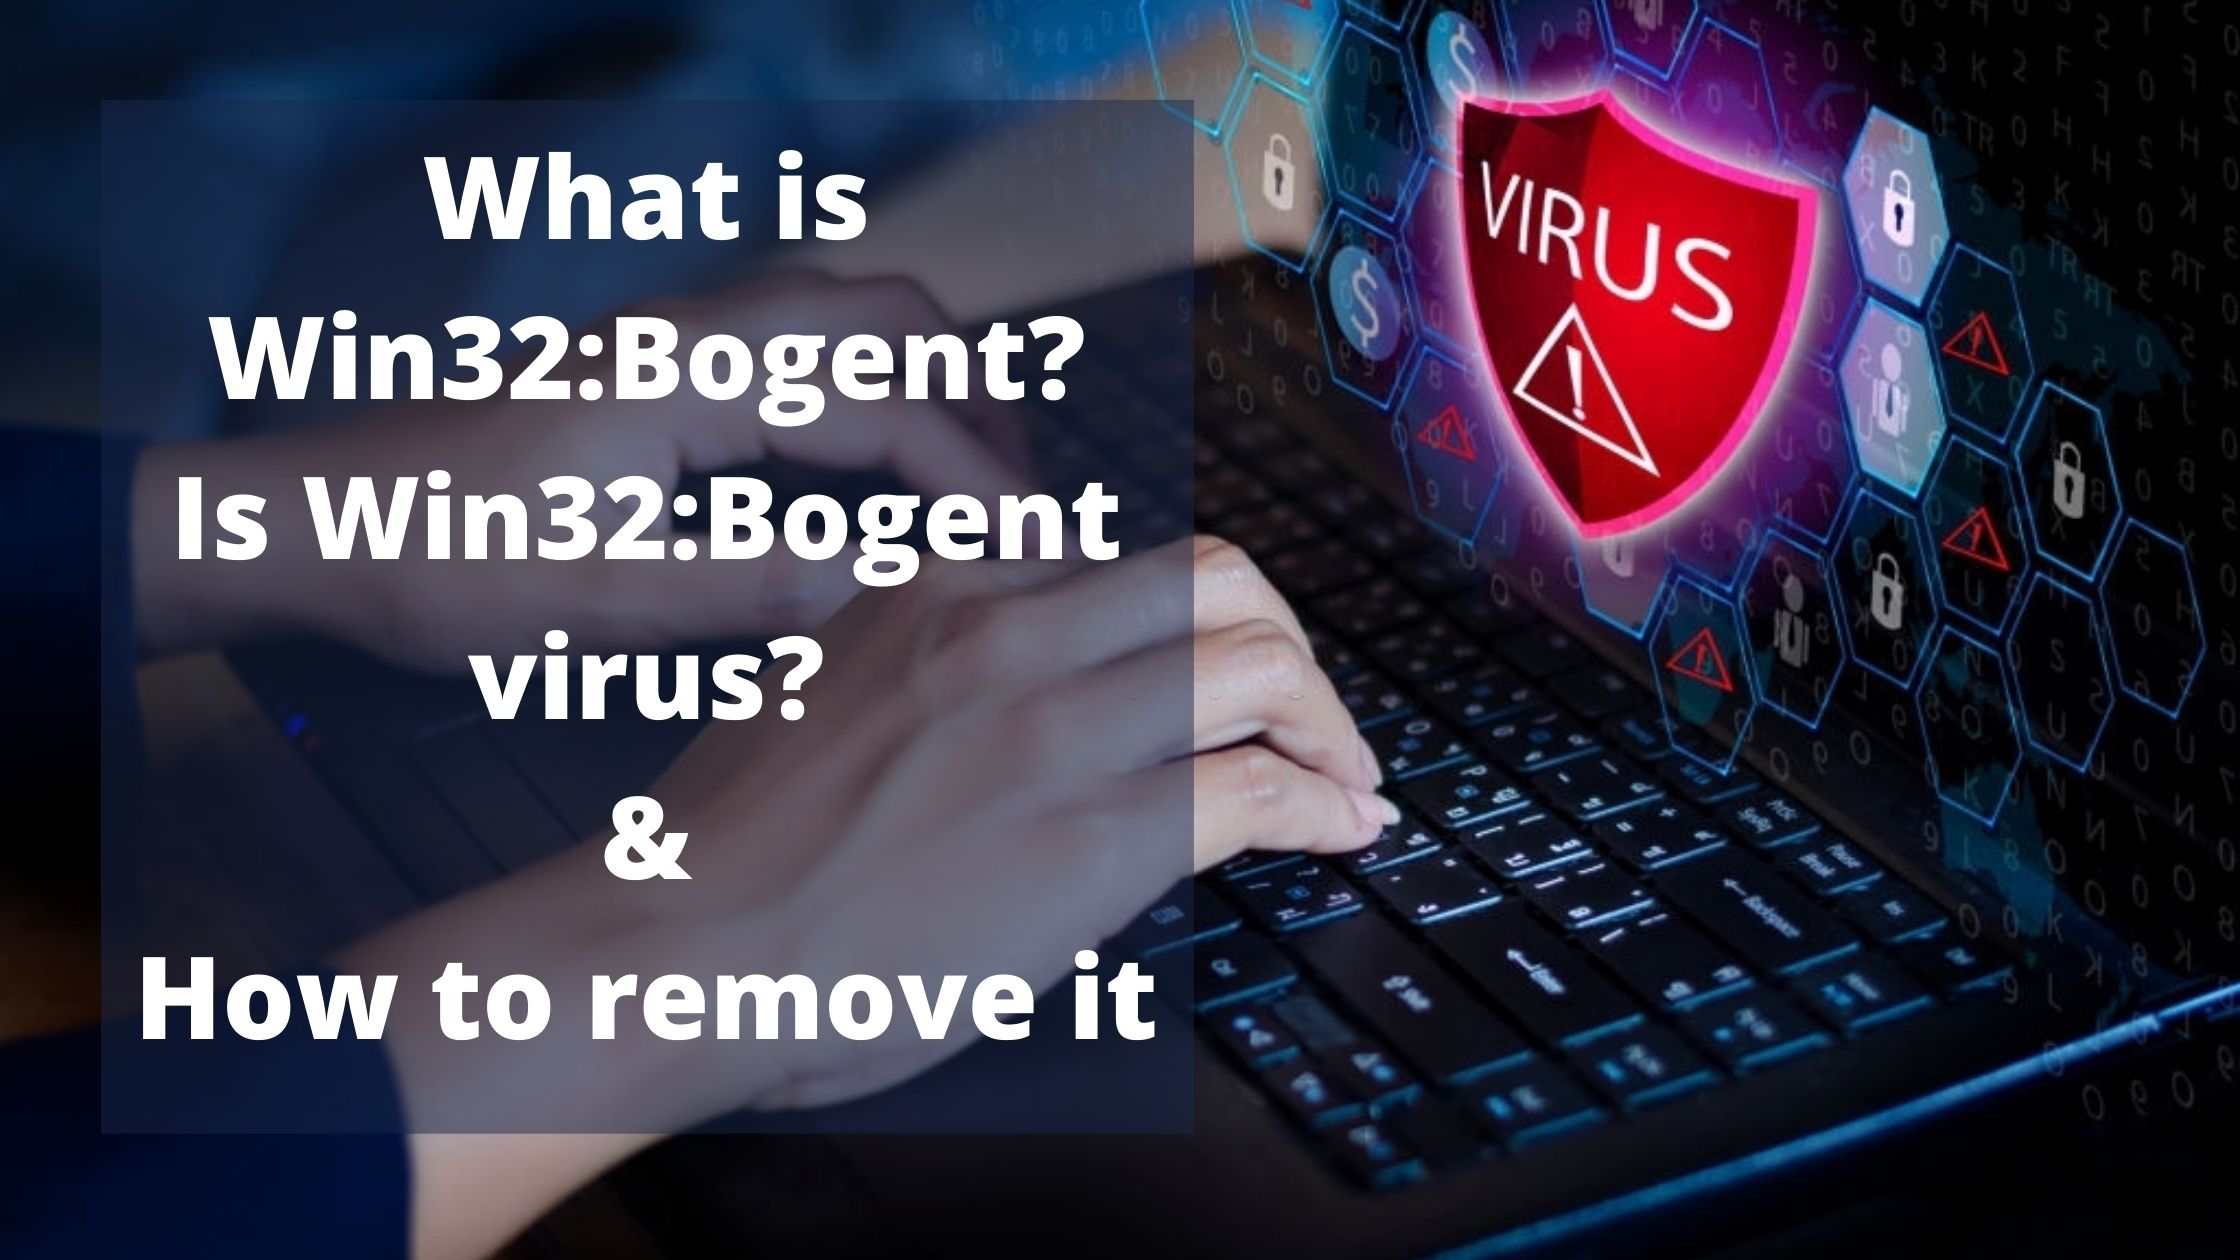 What is Win32: Bogent and how to remove it